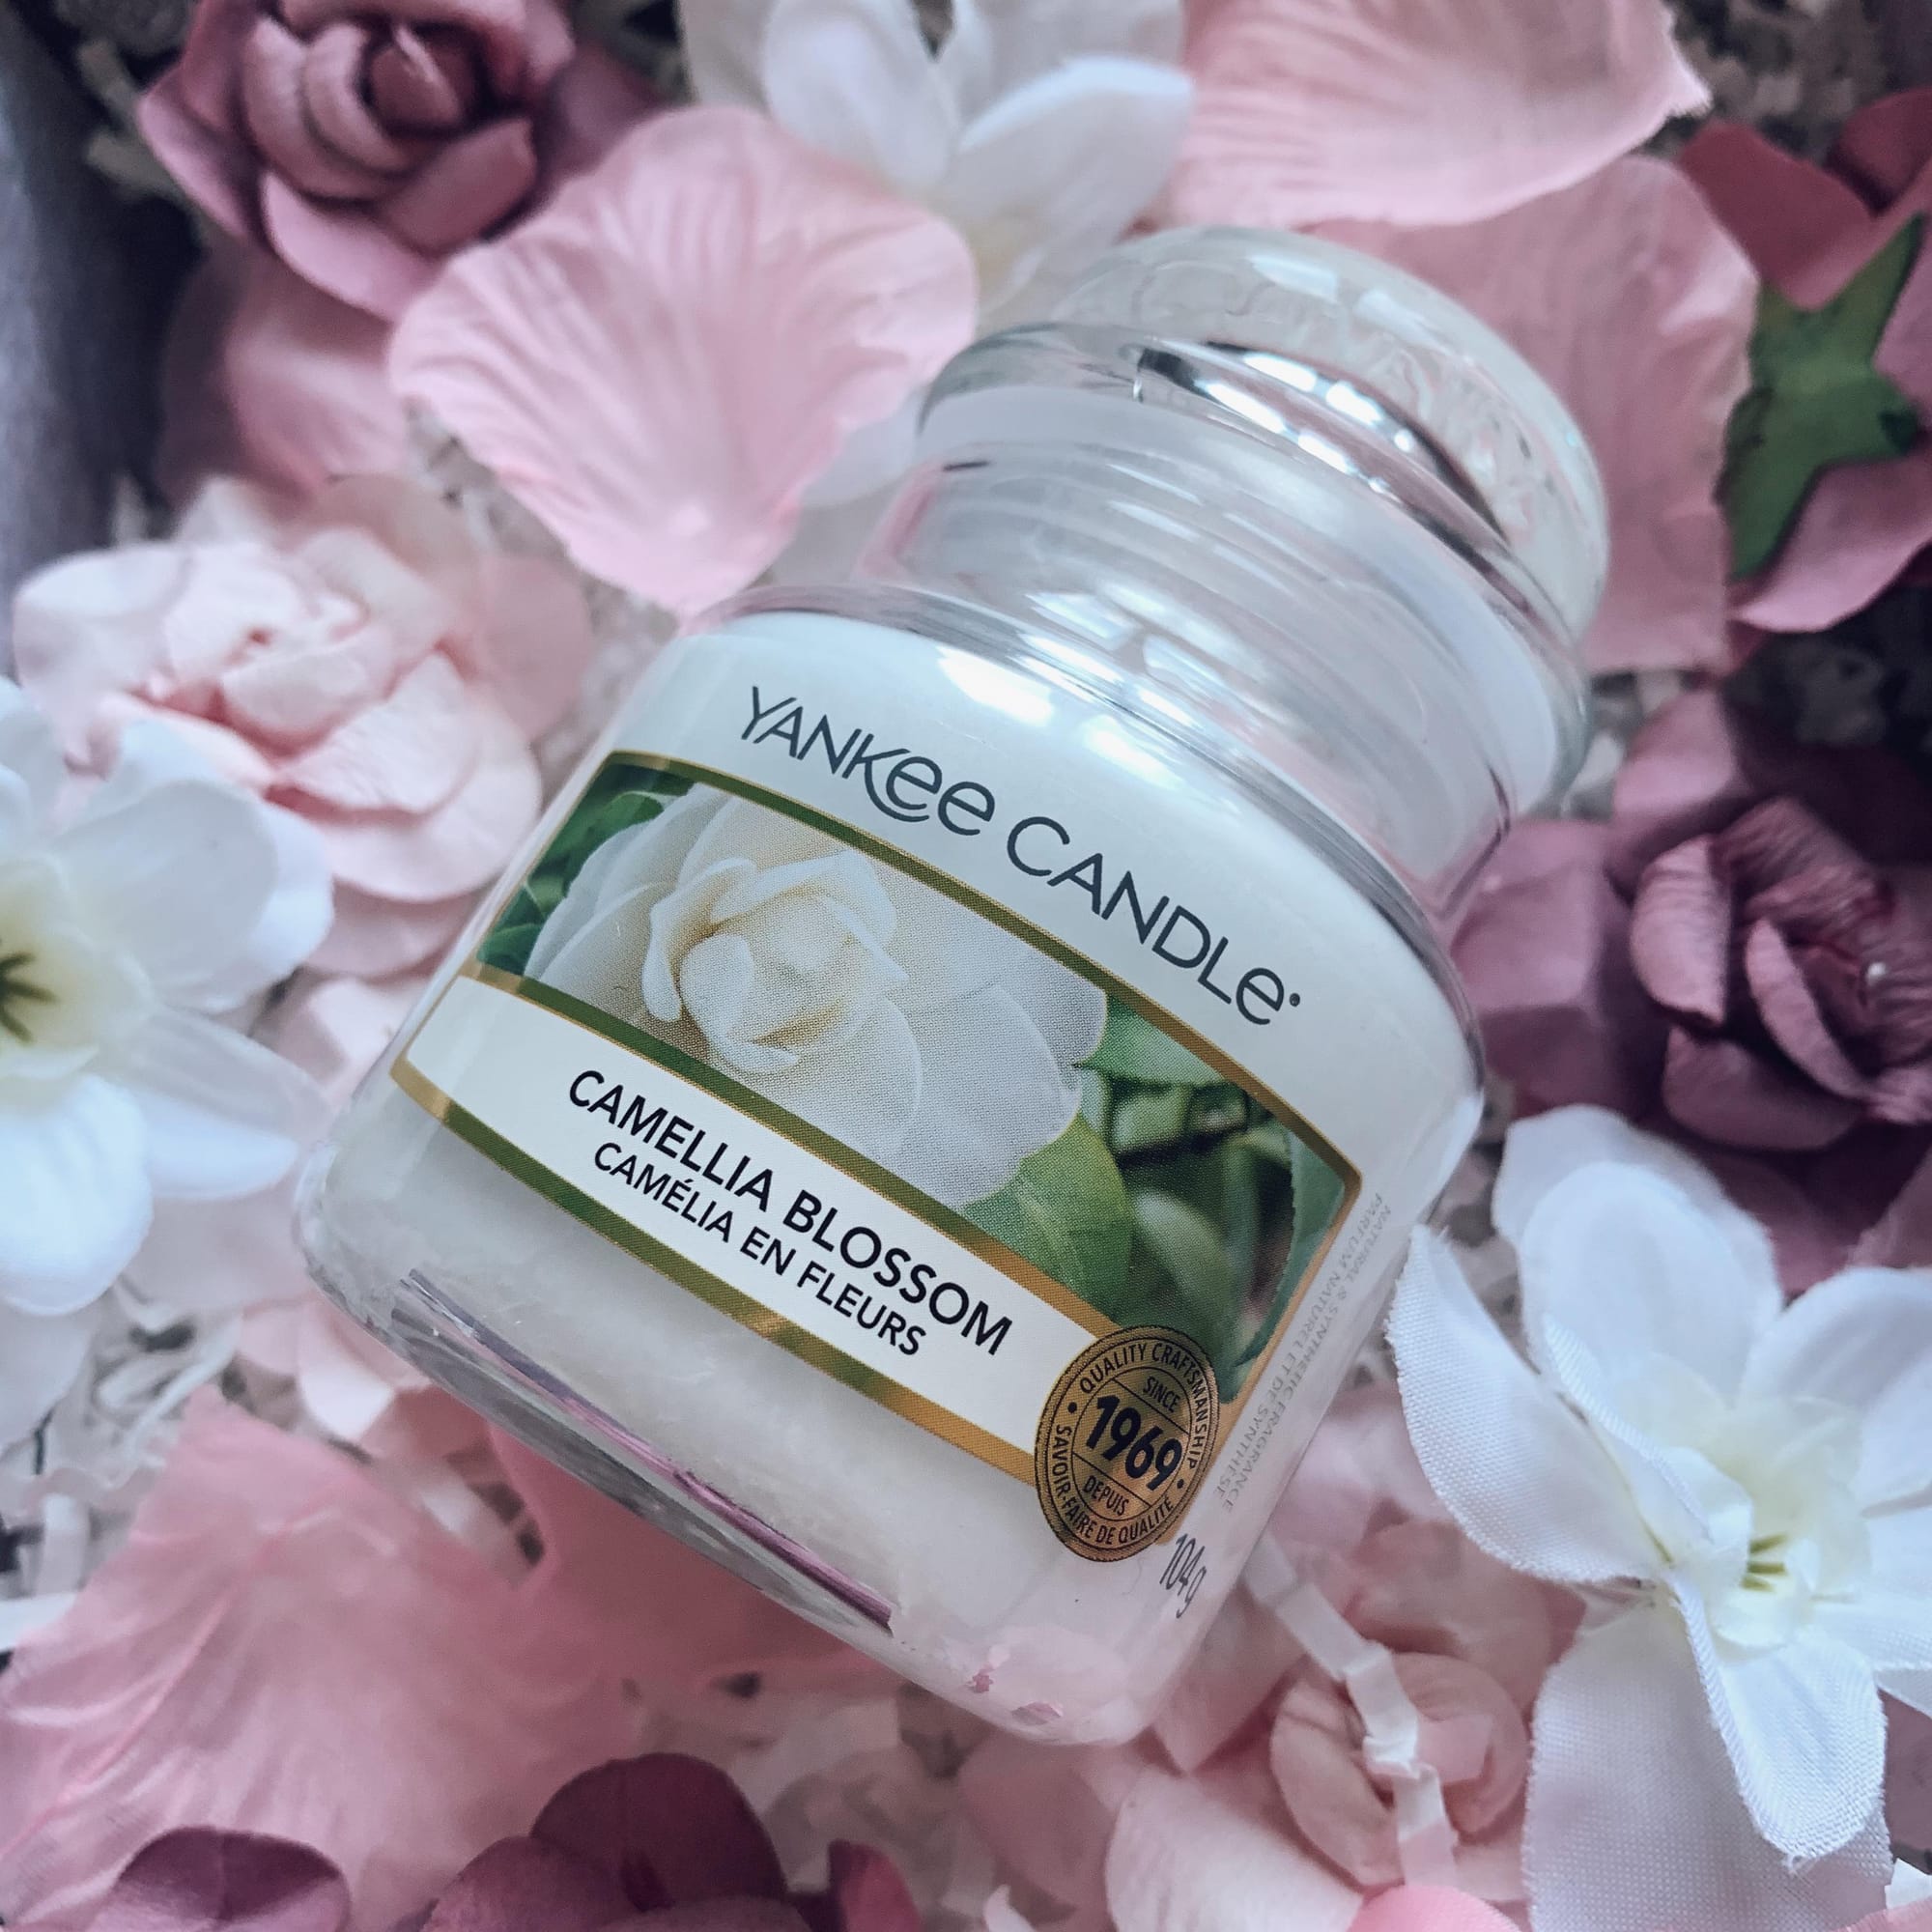 Yankee Candle Small Jar Candle Camellia Blossom - Only For You - Limited Edition Mother's Day Glossybox 2020 Review - Miss Boux